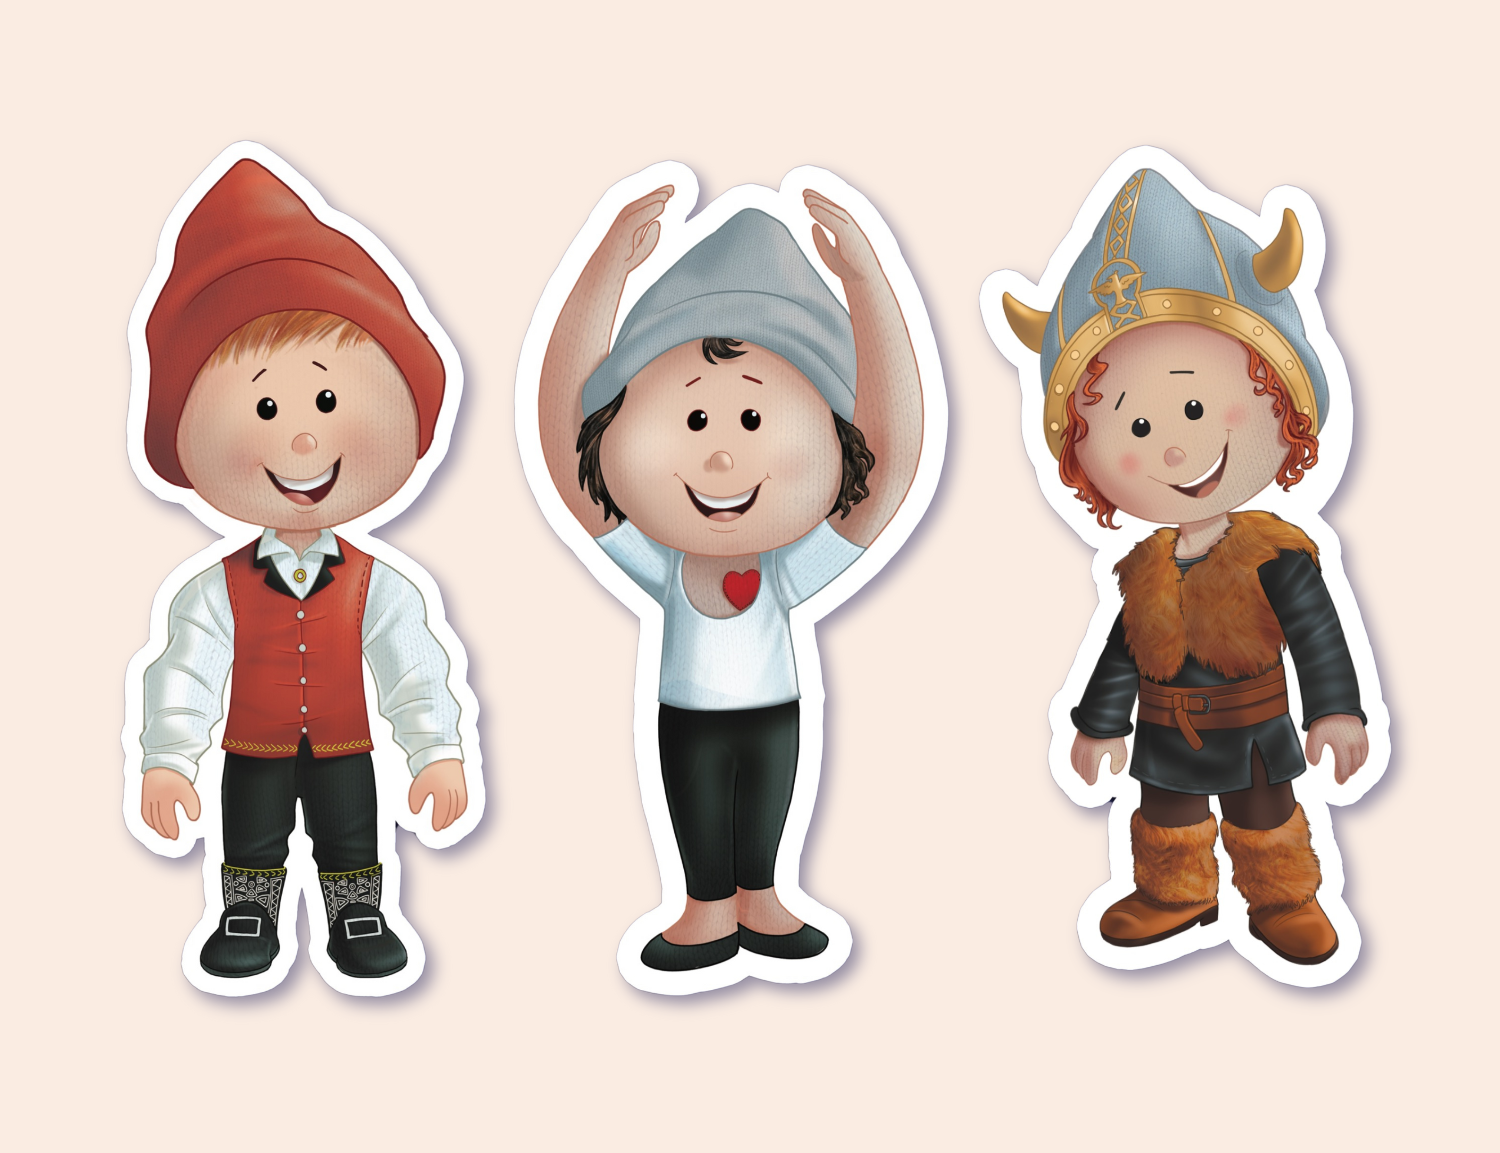 A set of three children's stickers featuring boy gnomes in different costumes: one in a traditional Norwegian bunad with a red hat, another in a Viking outfit with a horned helmet, and the last in a ballet pose wearing a blue beanie and a shirt with a red heart. Each sticker is outlined to show it's a peelable sticker.